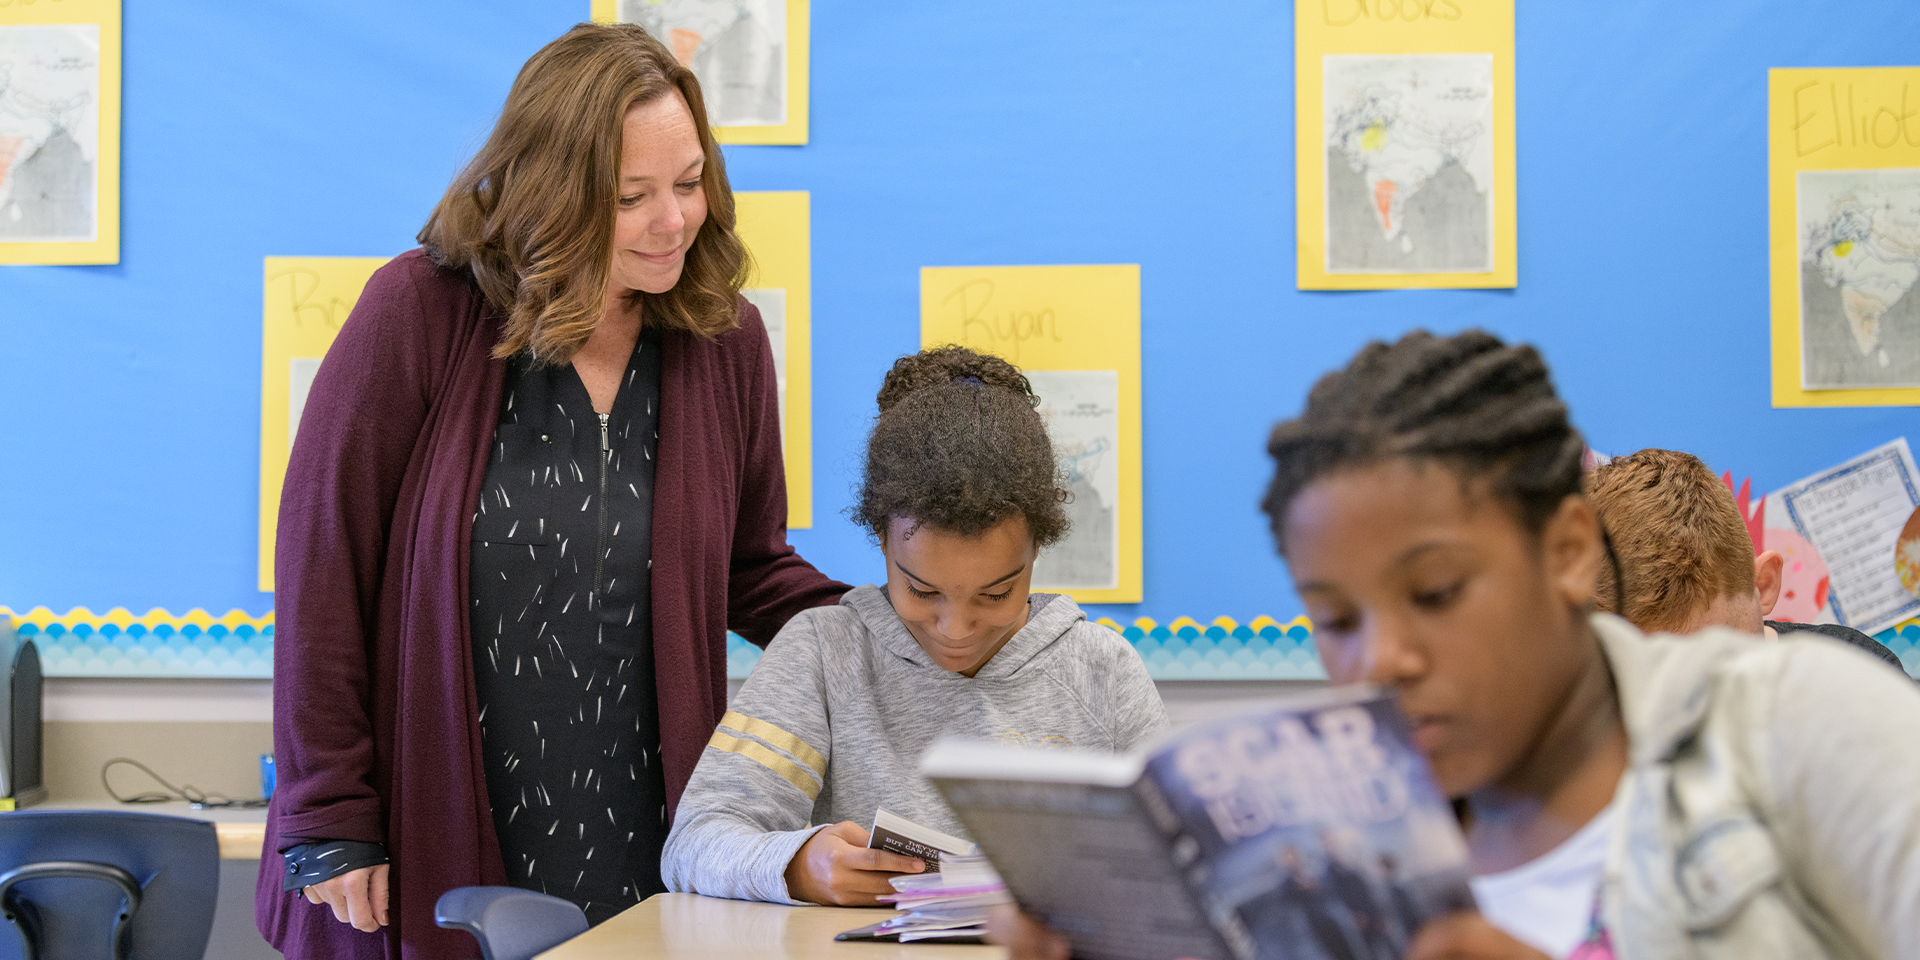 Teacher looks over student's shoulder as she reads book